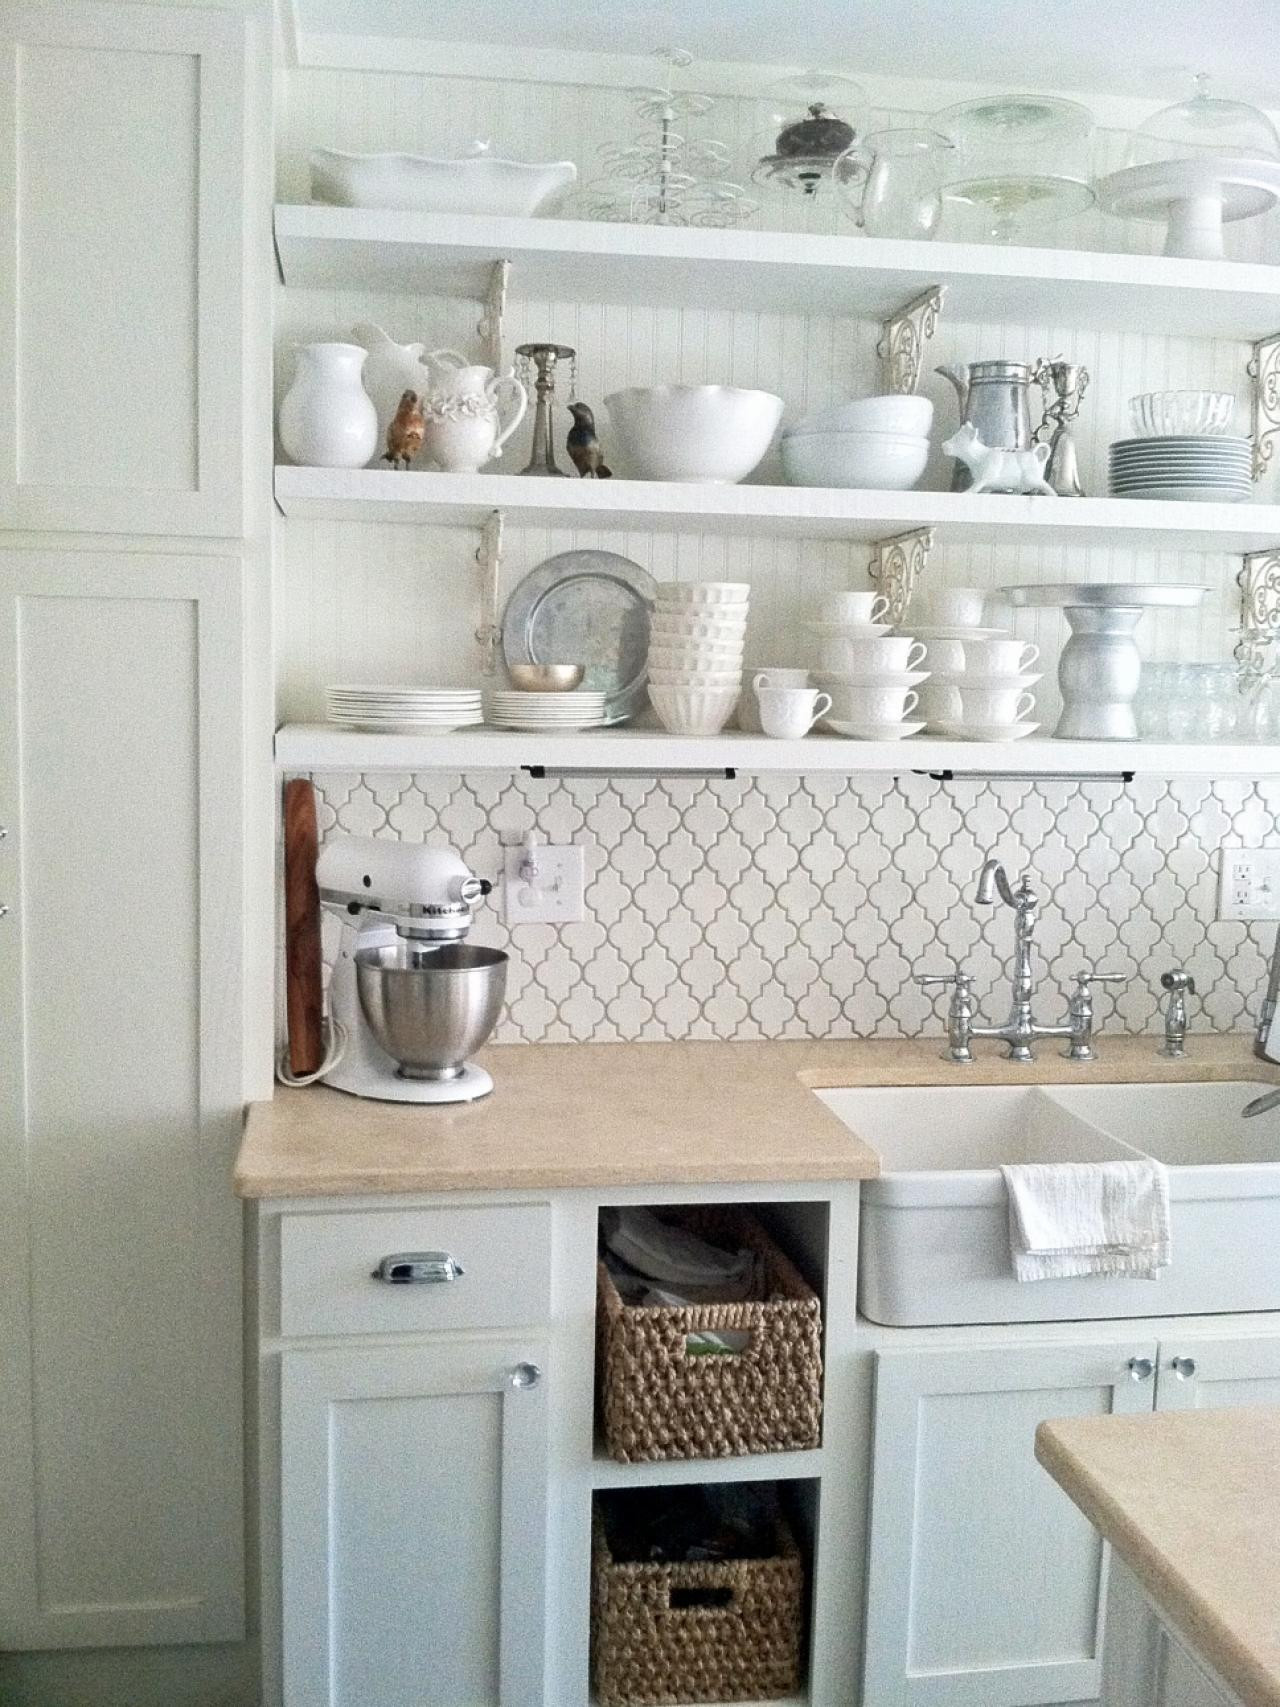 Kitchen Wall Storage Ideas
 White Wall Shelves for Effective Storage in Small Kitchen